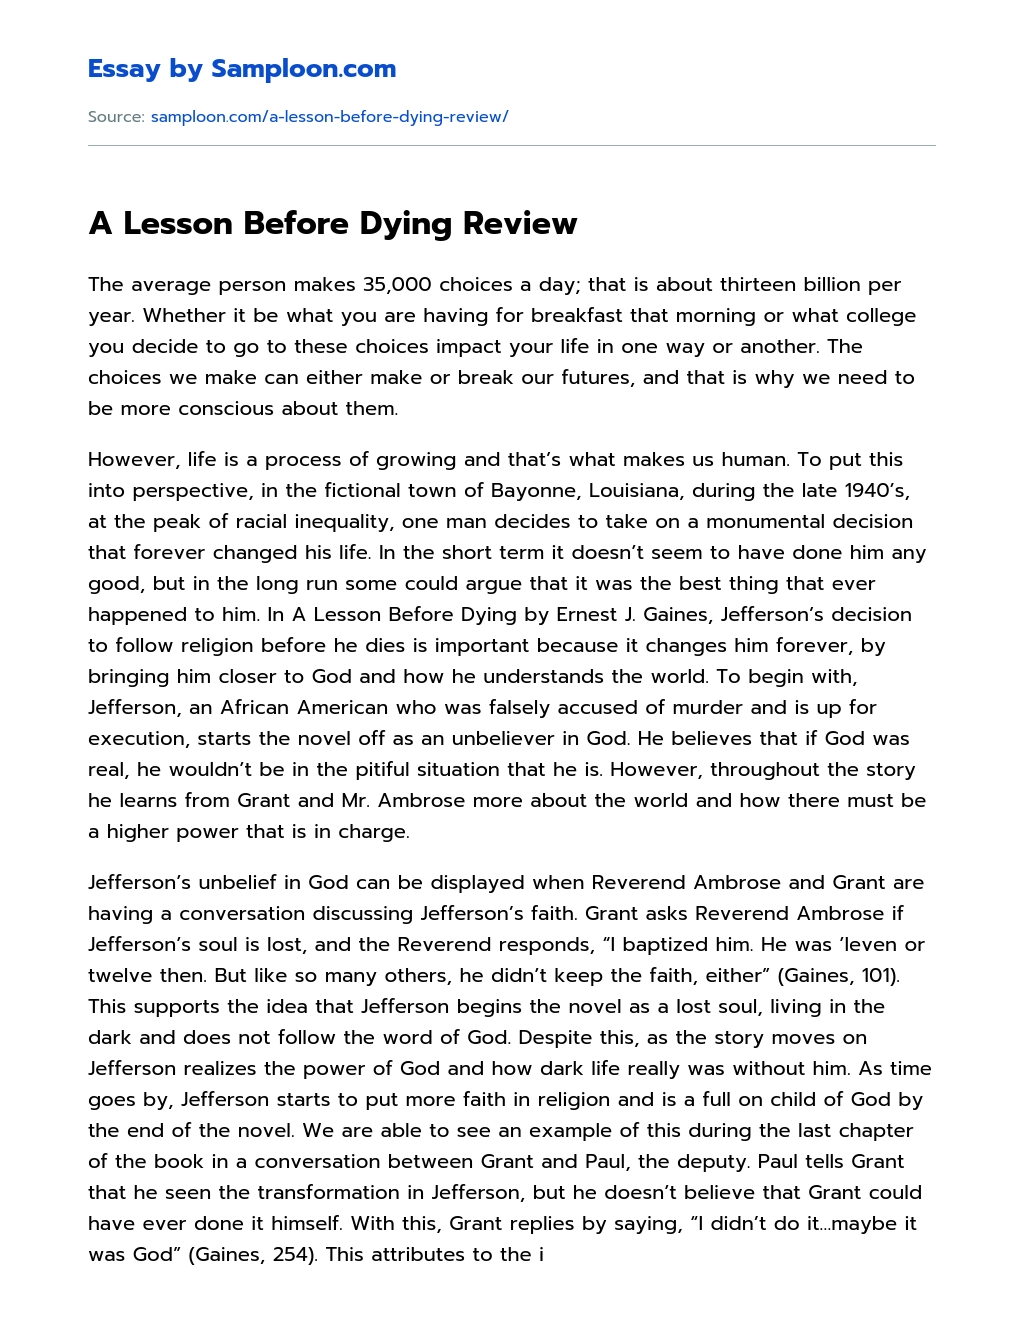 a lesson before dying literary analysis essay